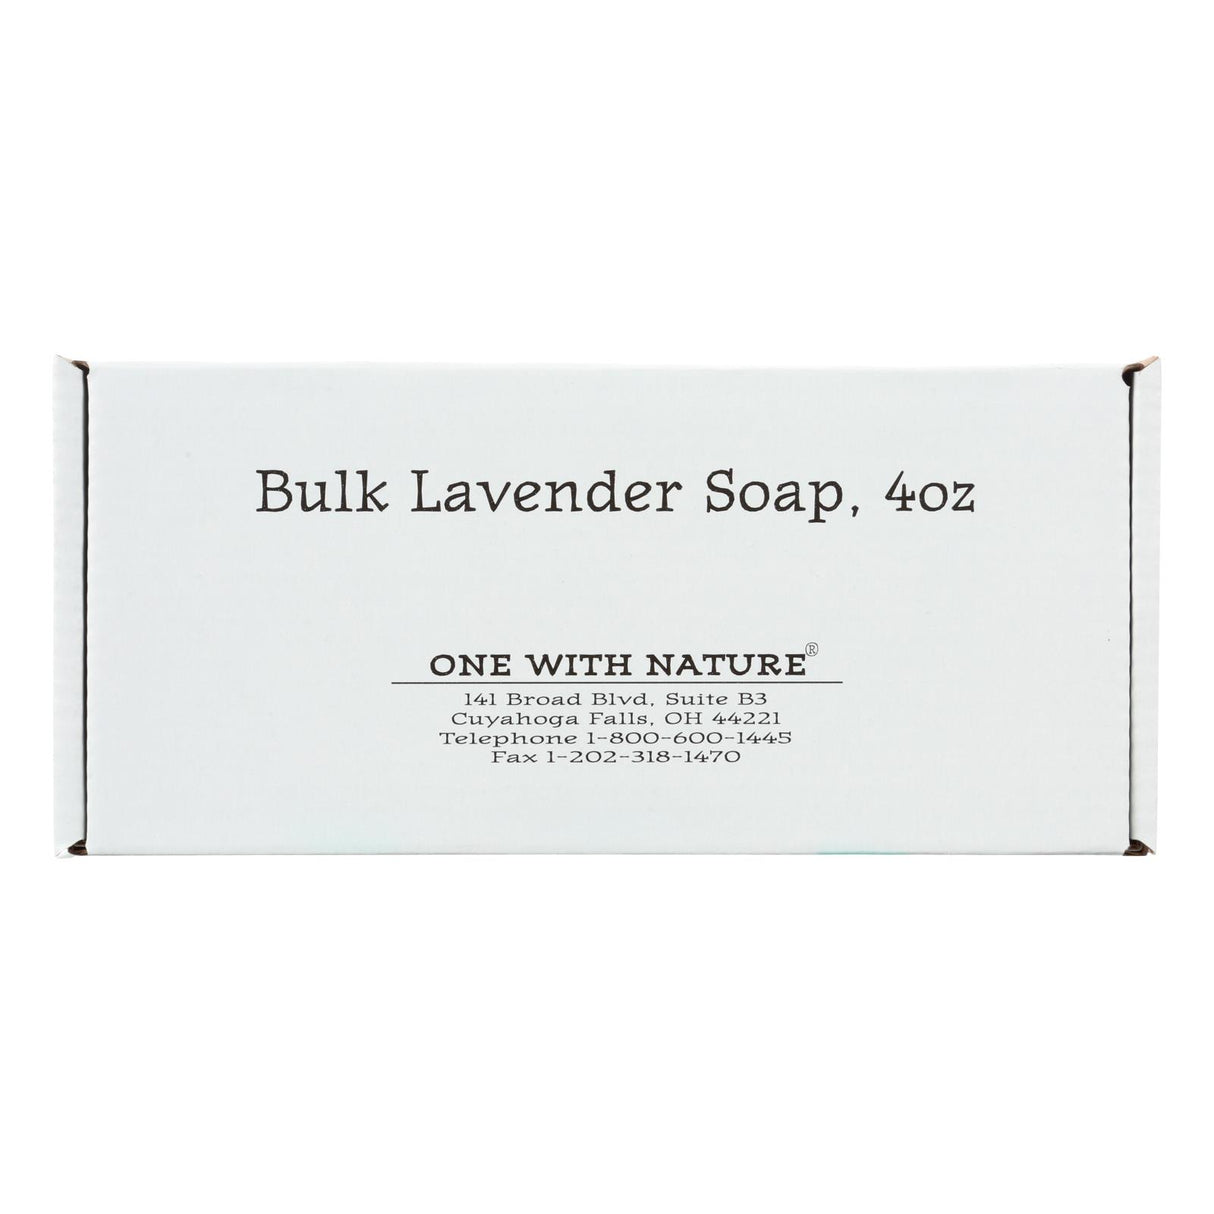 One With Nature Bar Soap - Lavender - Case Of 24 - 4 Oz.